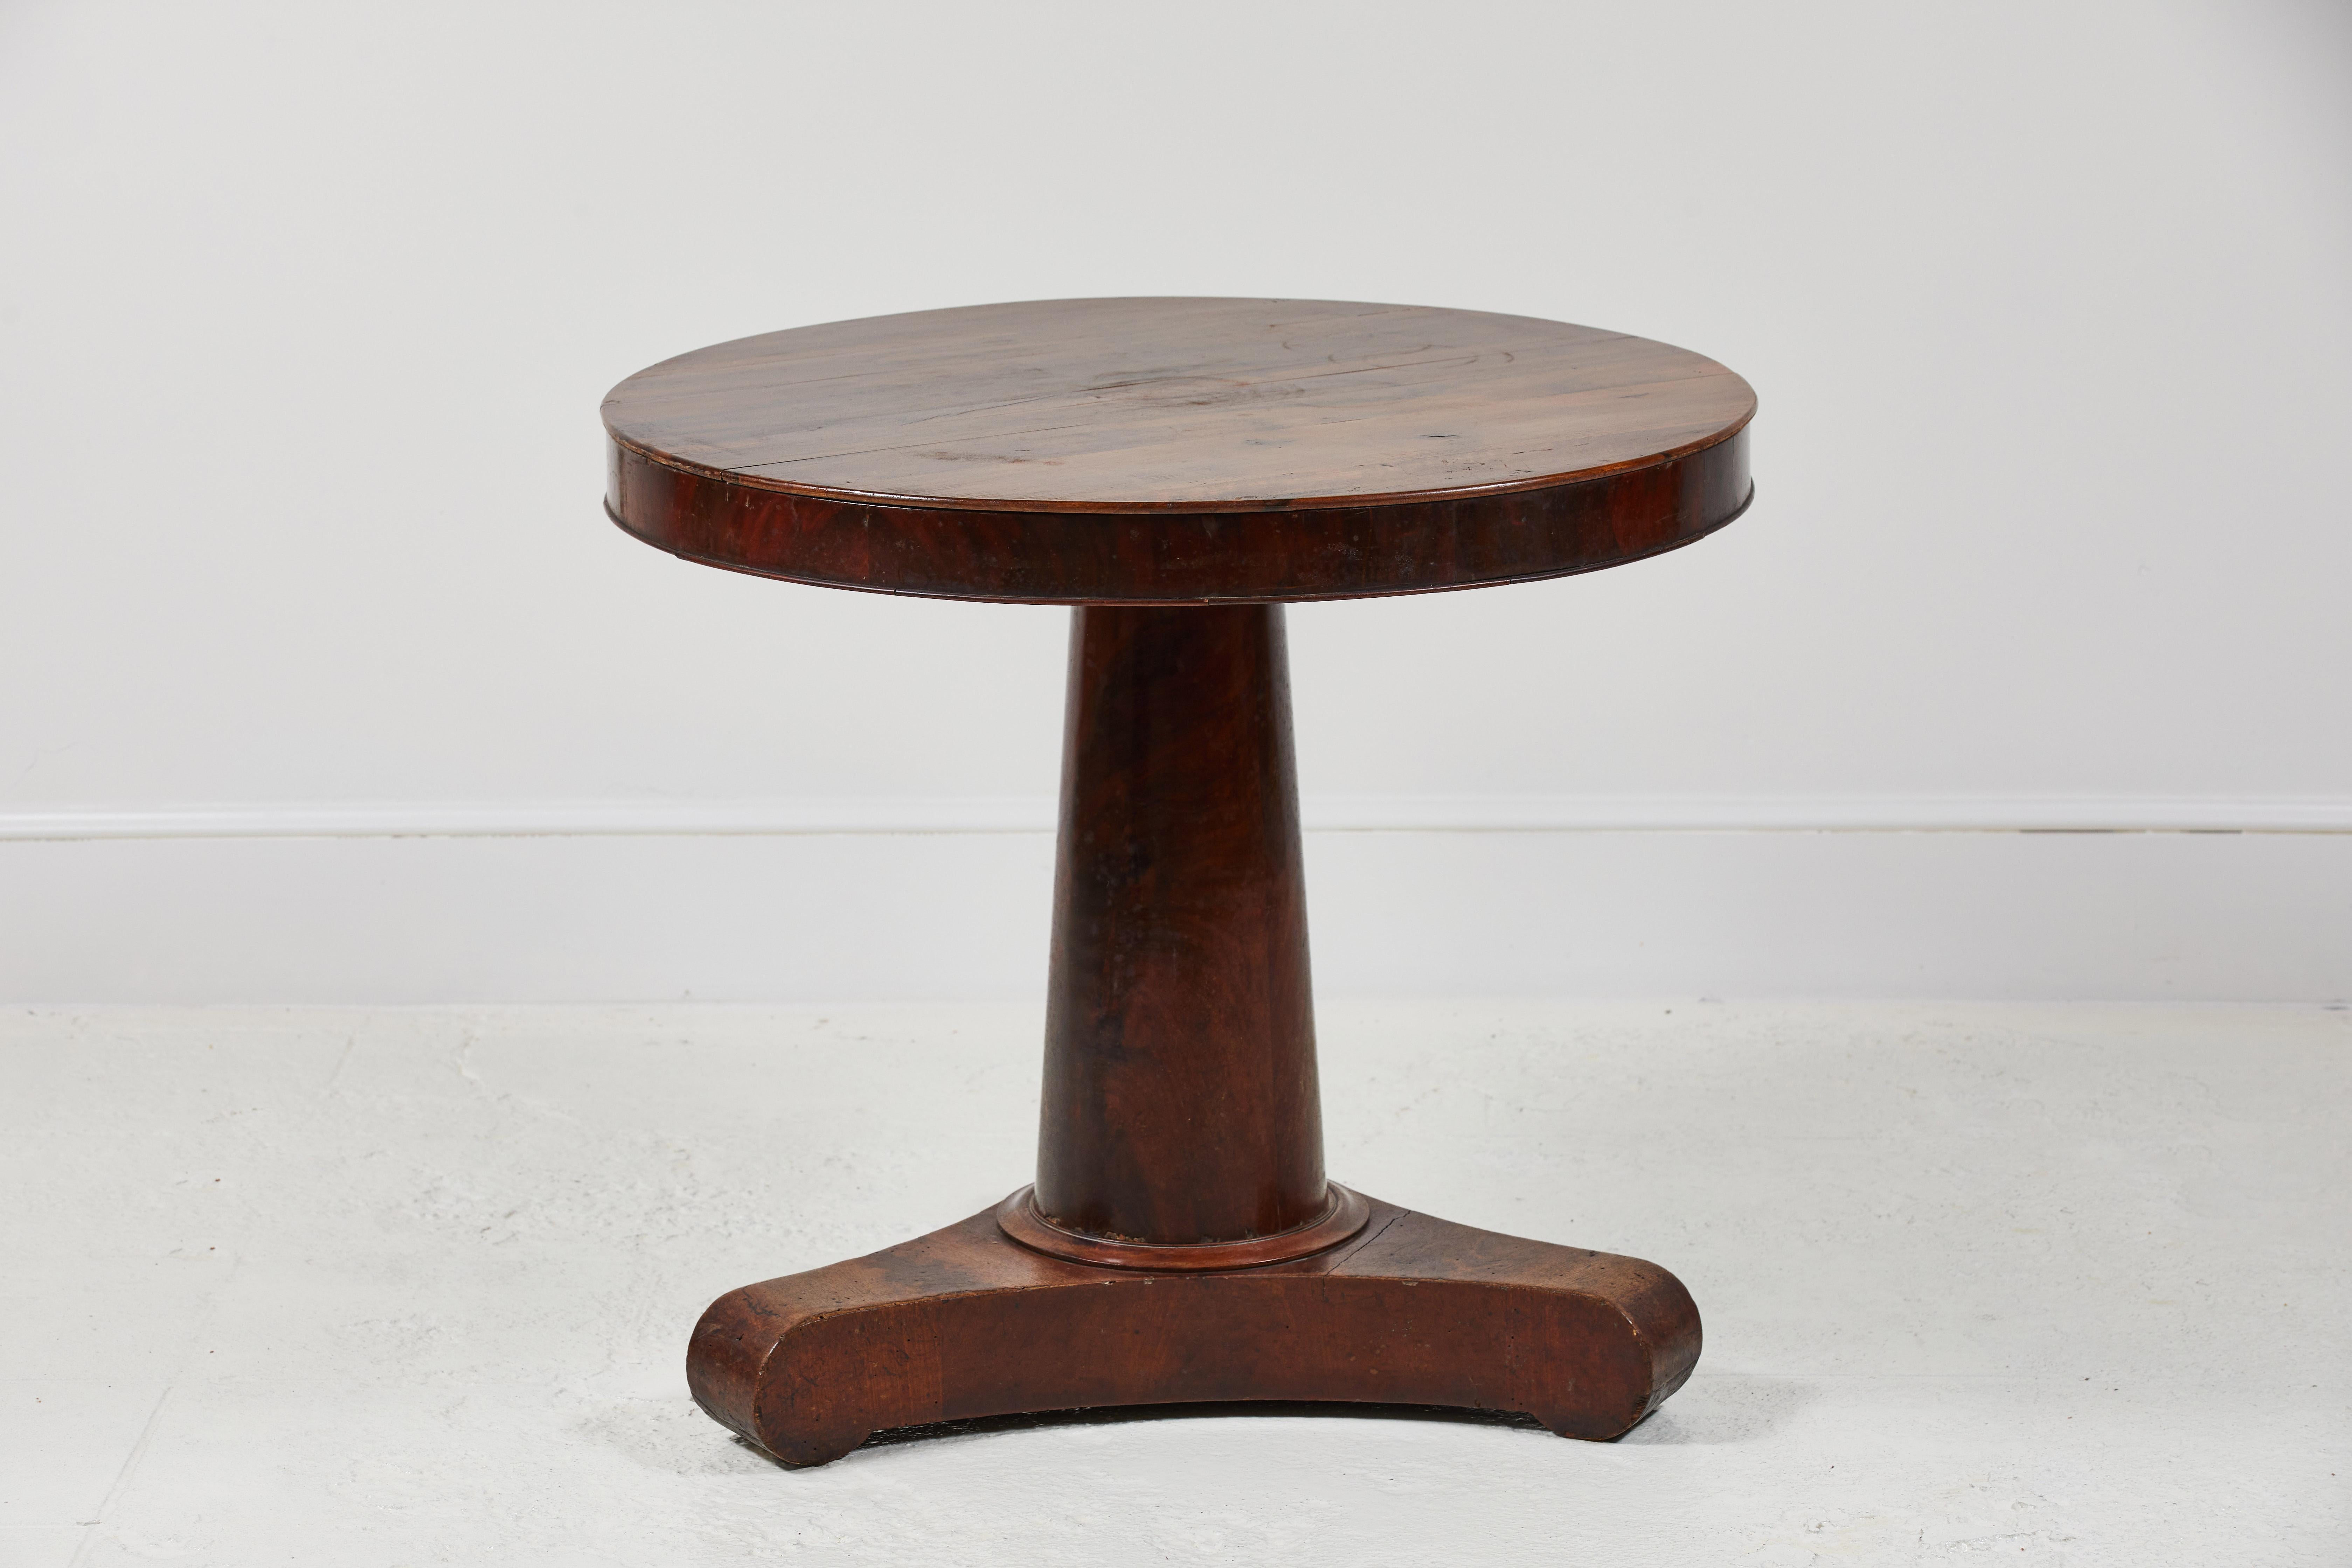 Beautiful French mahogany pedestal table with three feet. The table makes for a great hall table, entry table or corner table.